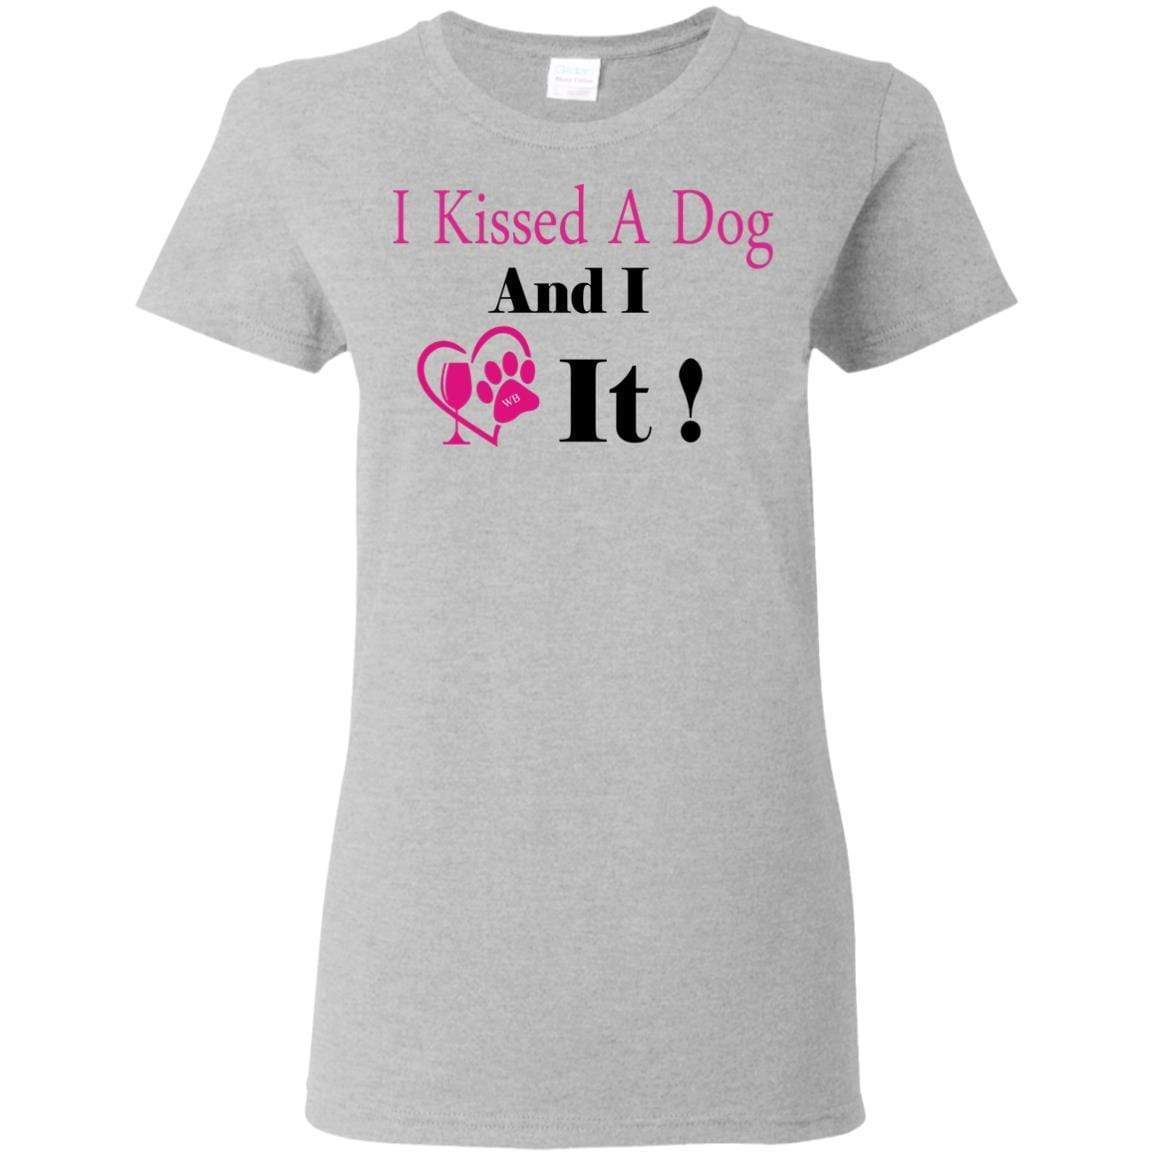 T-Shirts Sport Grey / S WineyBitches.co "I Kissed A Dog And I Loved It:" Ladies' 5.3 oz. T-Shirt WineyBitchesCo